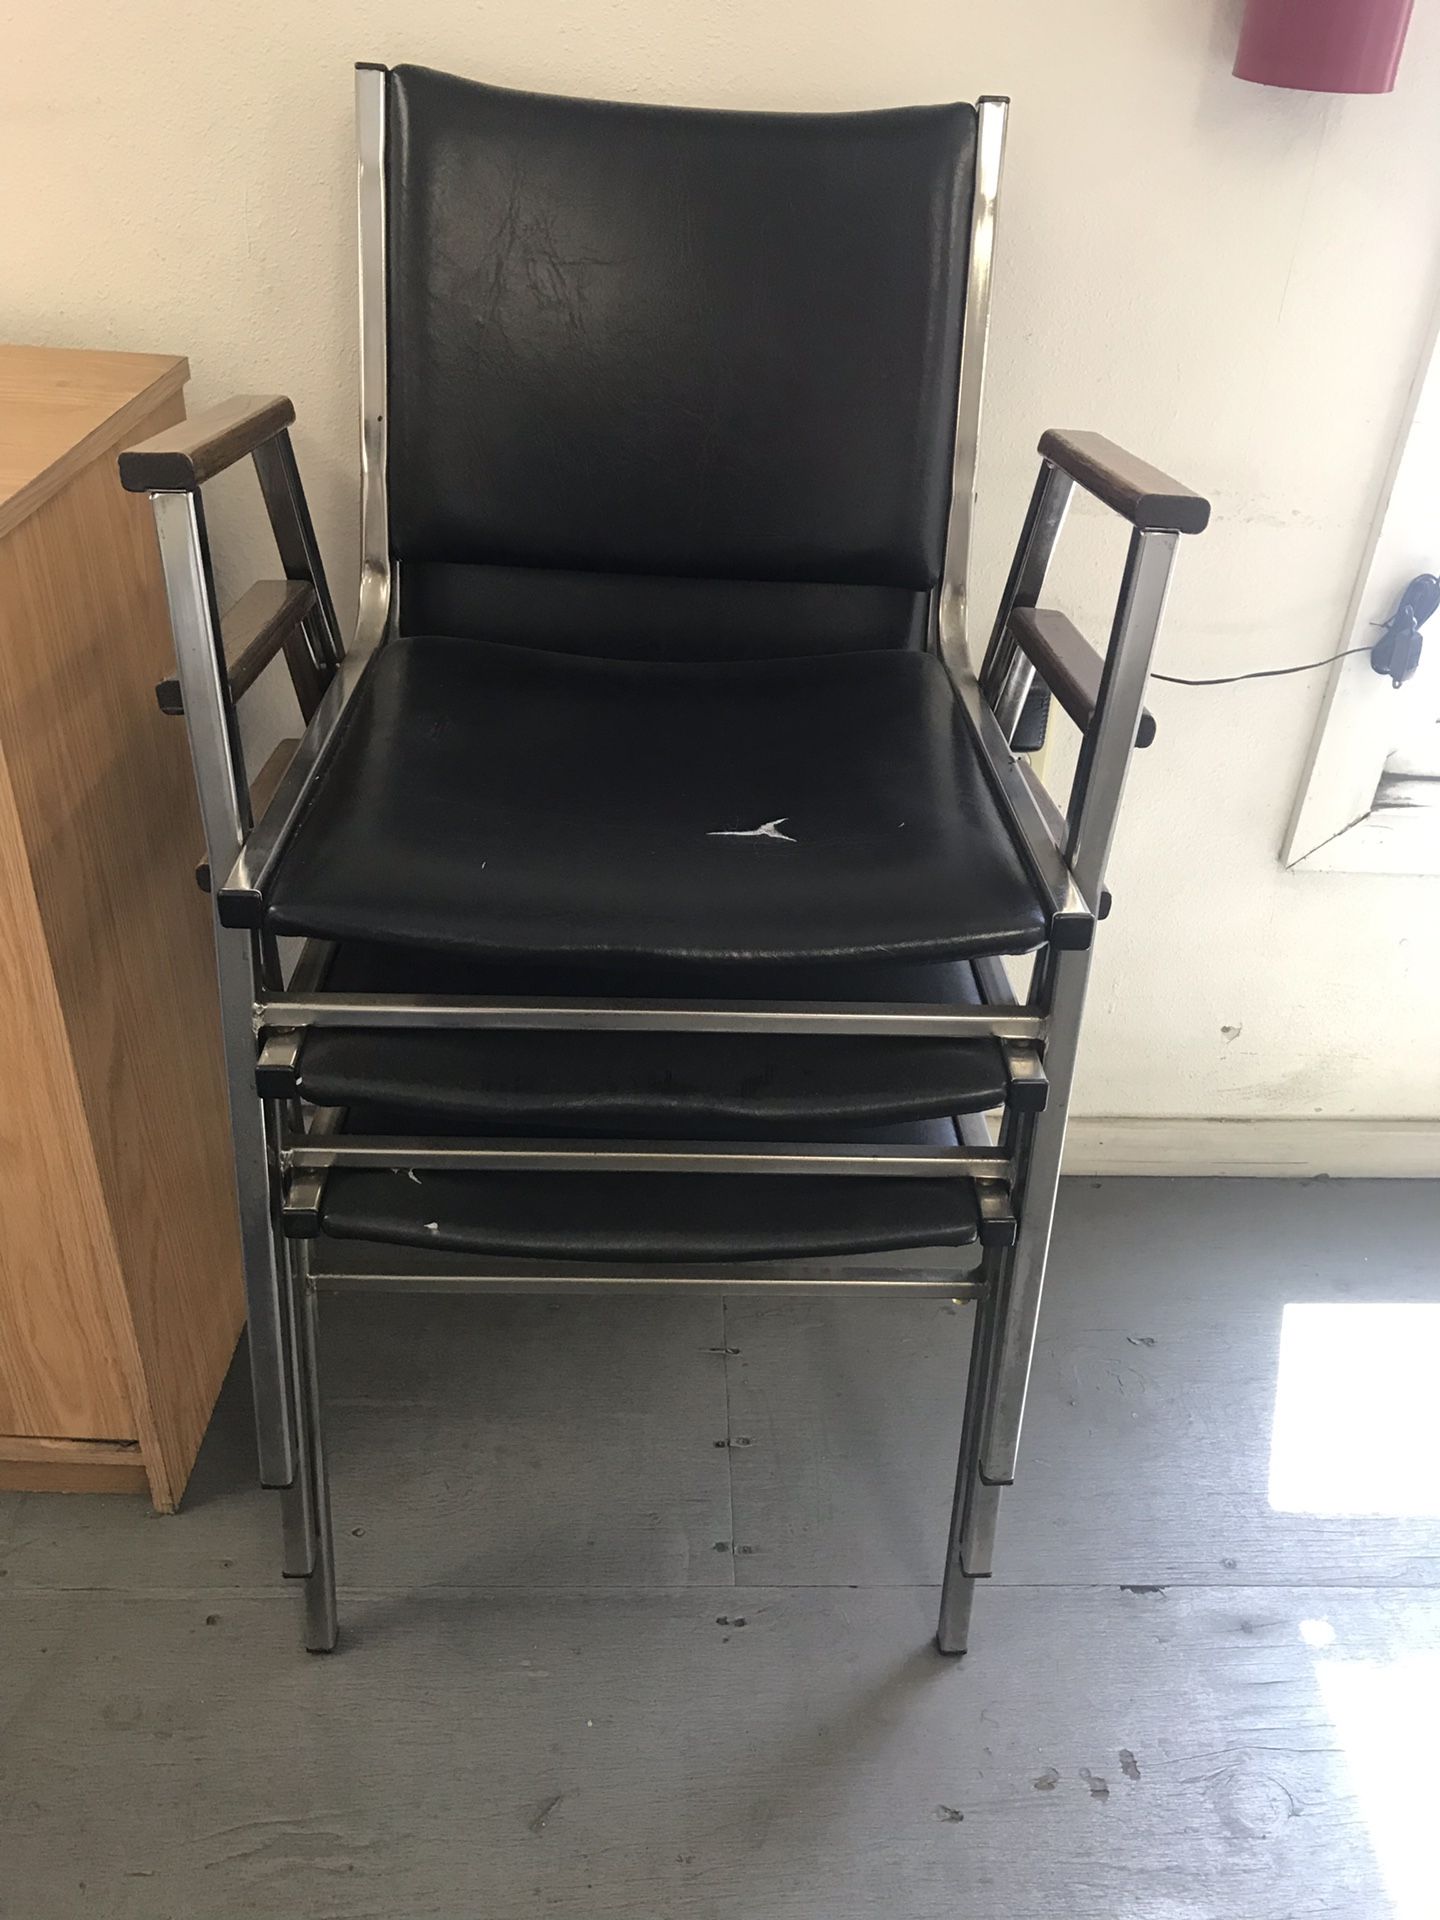 3 waiting chairs for office or waiting room